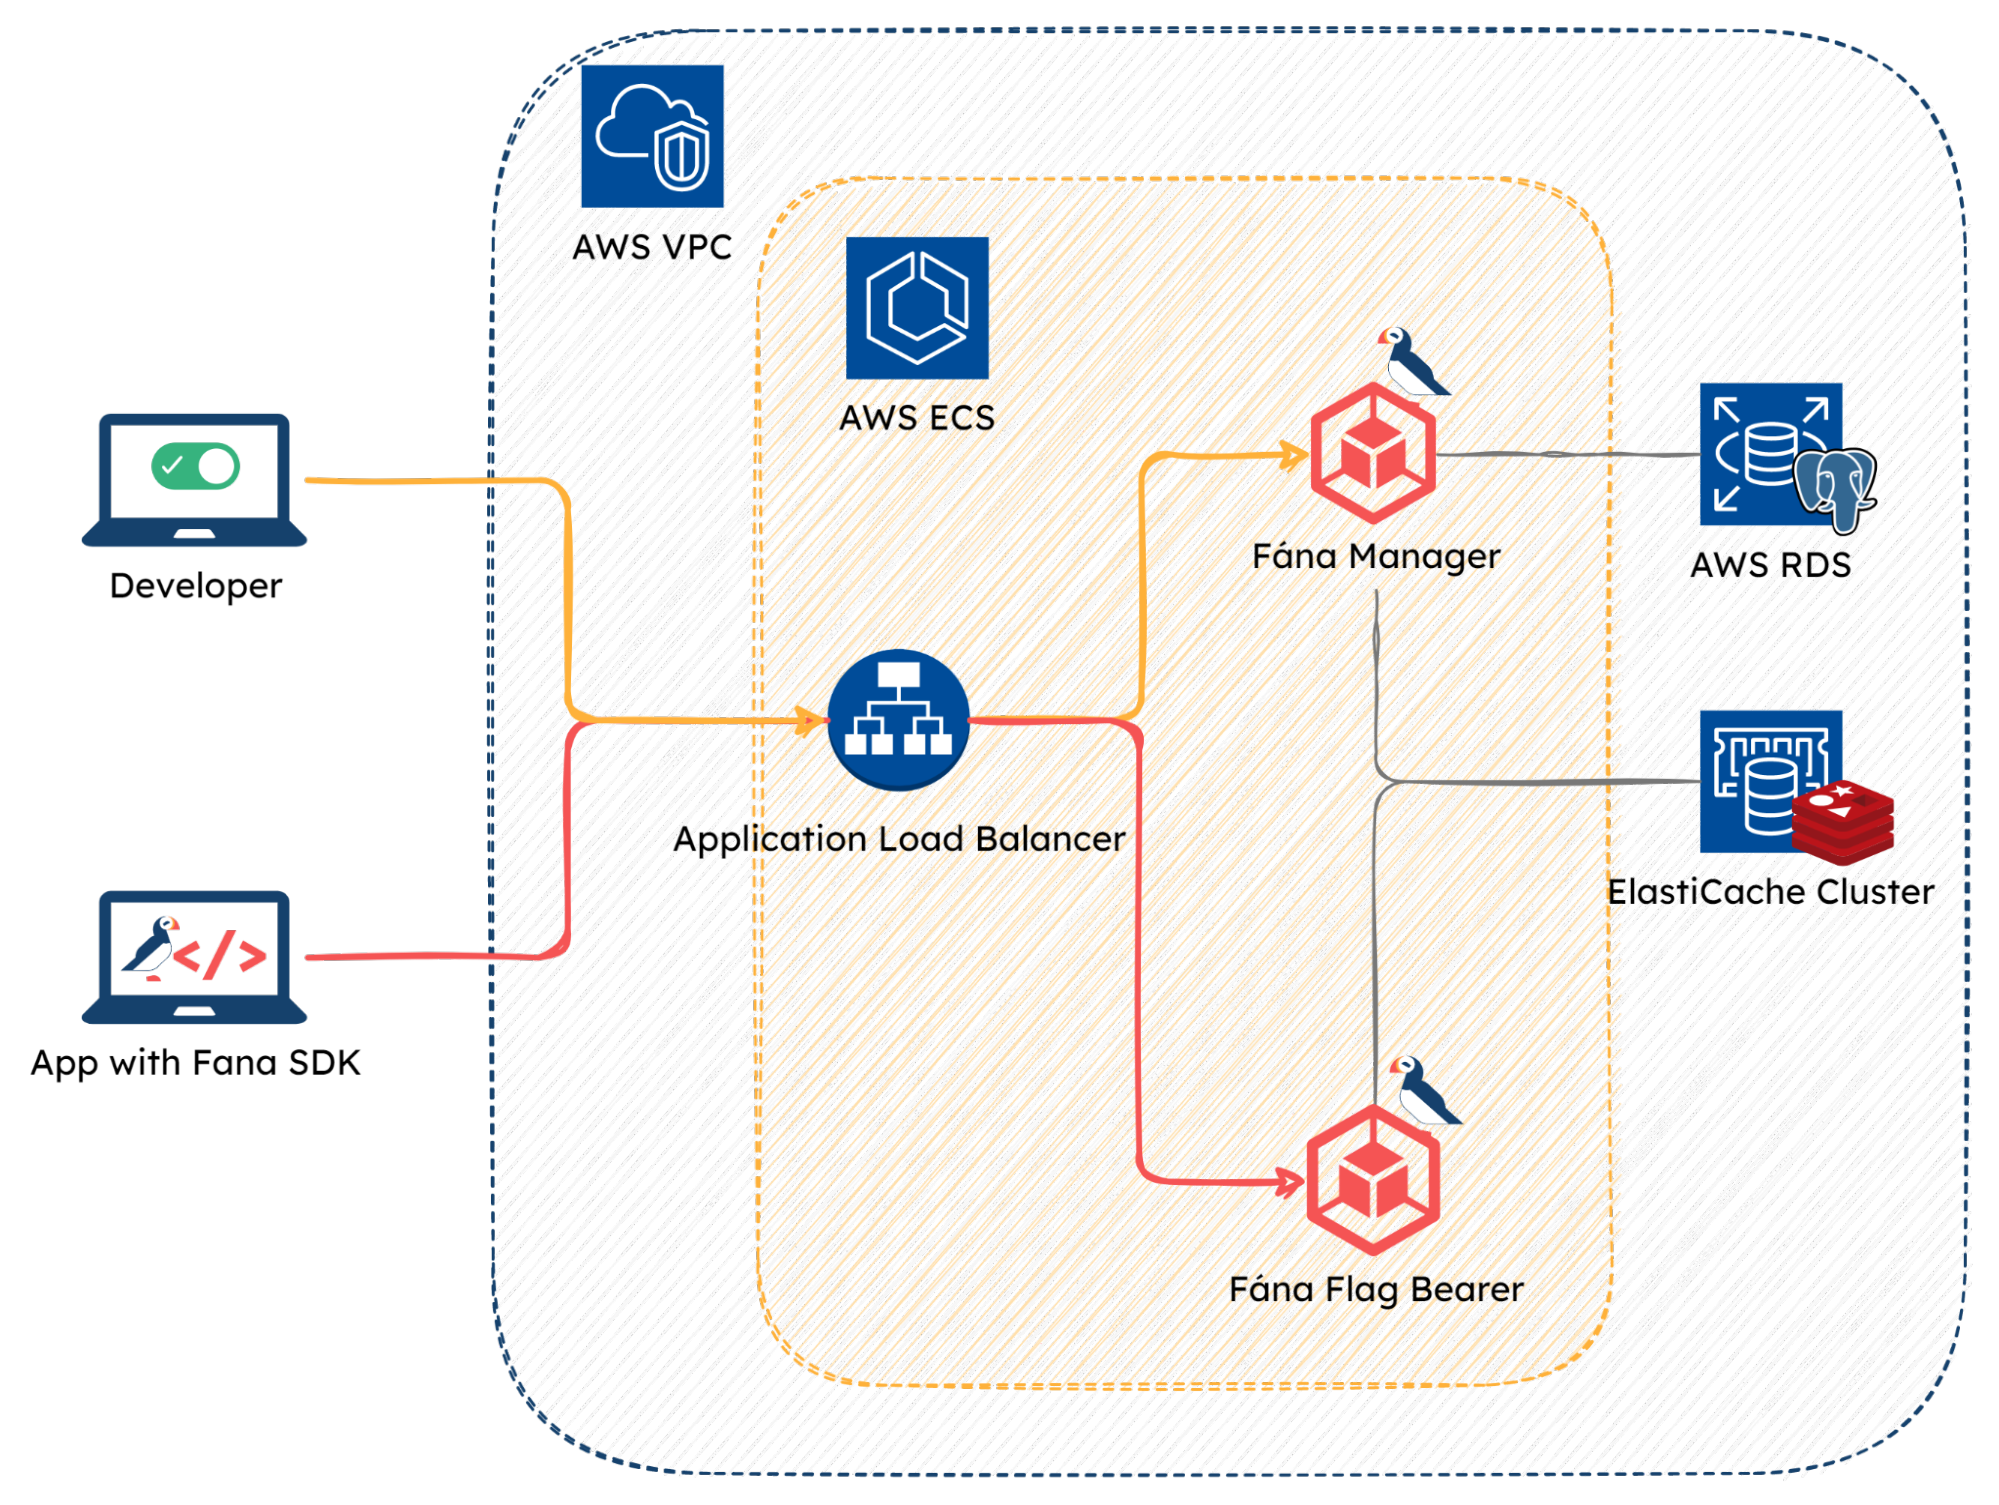 Fana's AWS cloud infrastructure includes a VPC, load balancer, ECS cluster with the Fana images, an RDS instance and a Elasticache cluster.